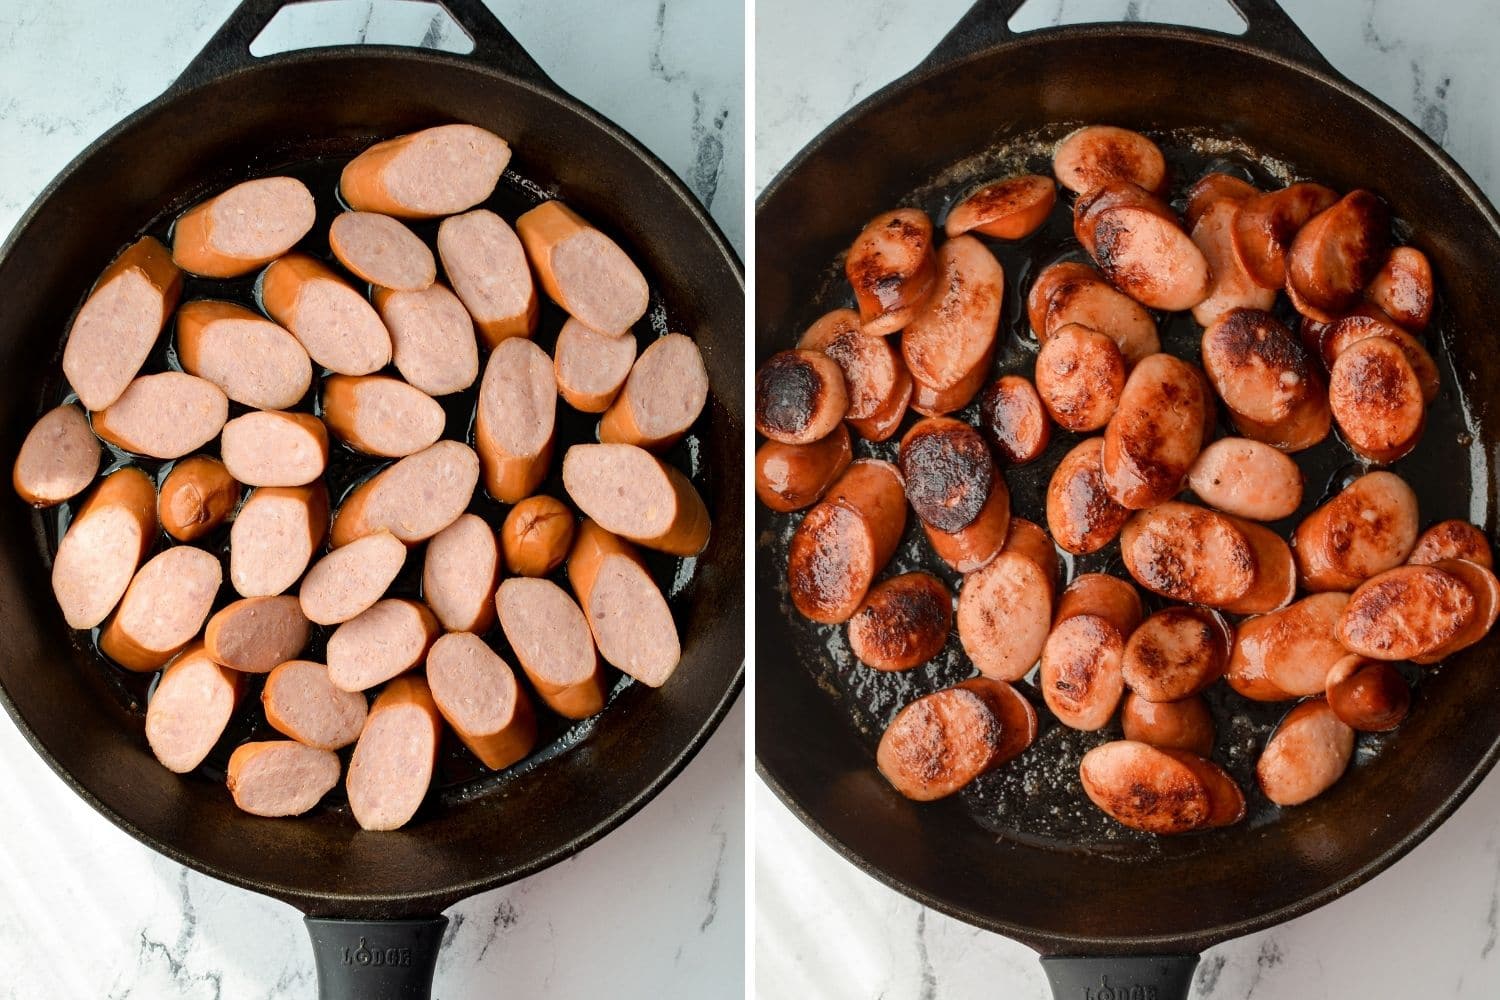 Browning sausage slices in a cast iron skillet.